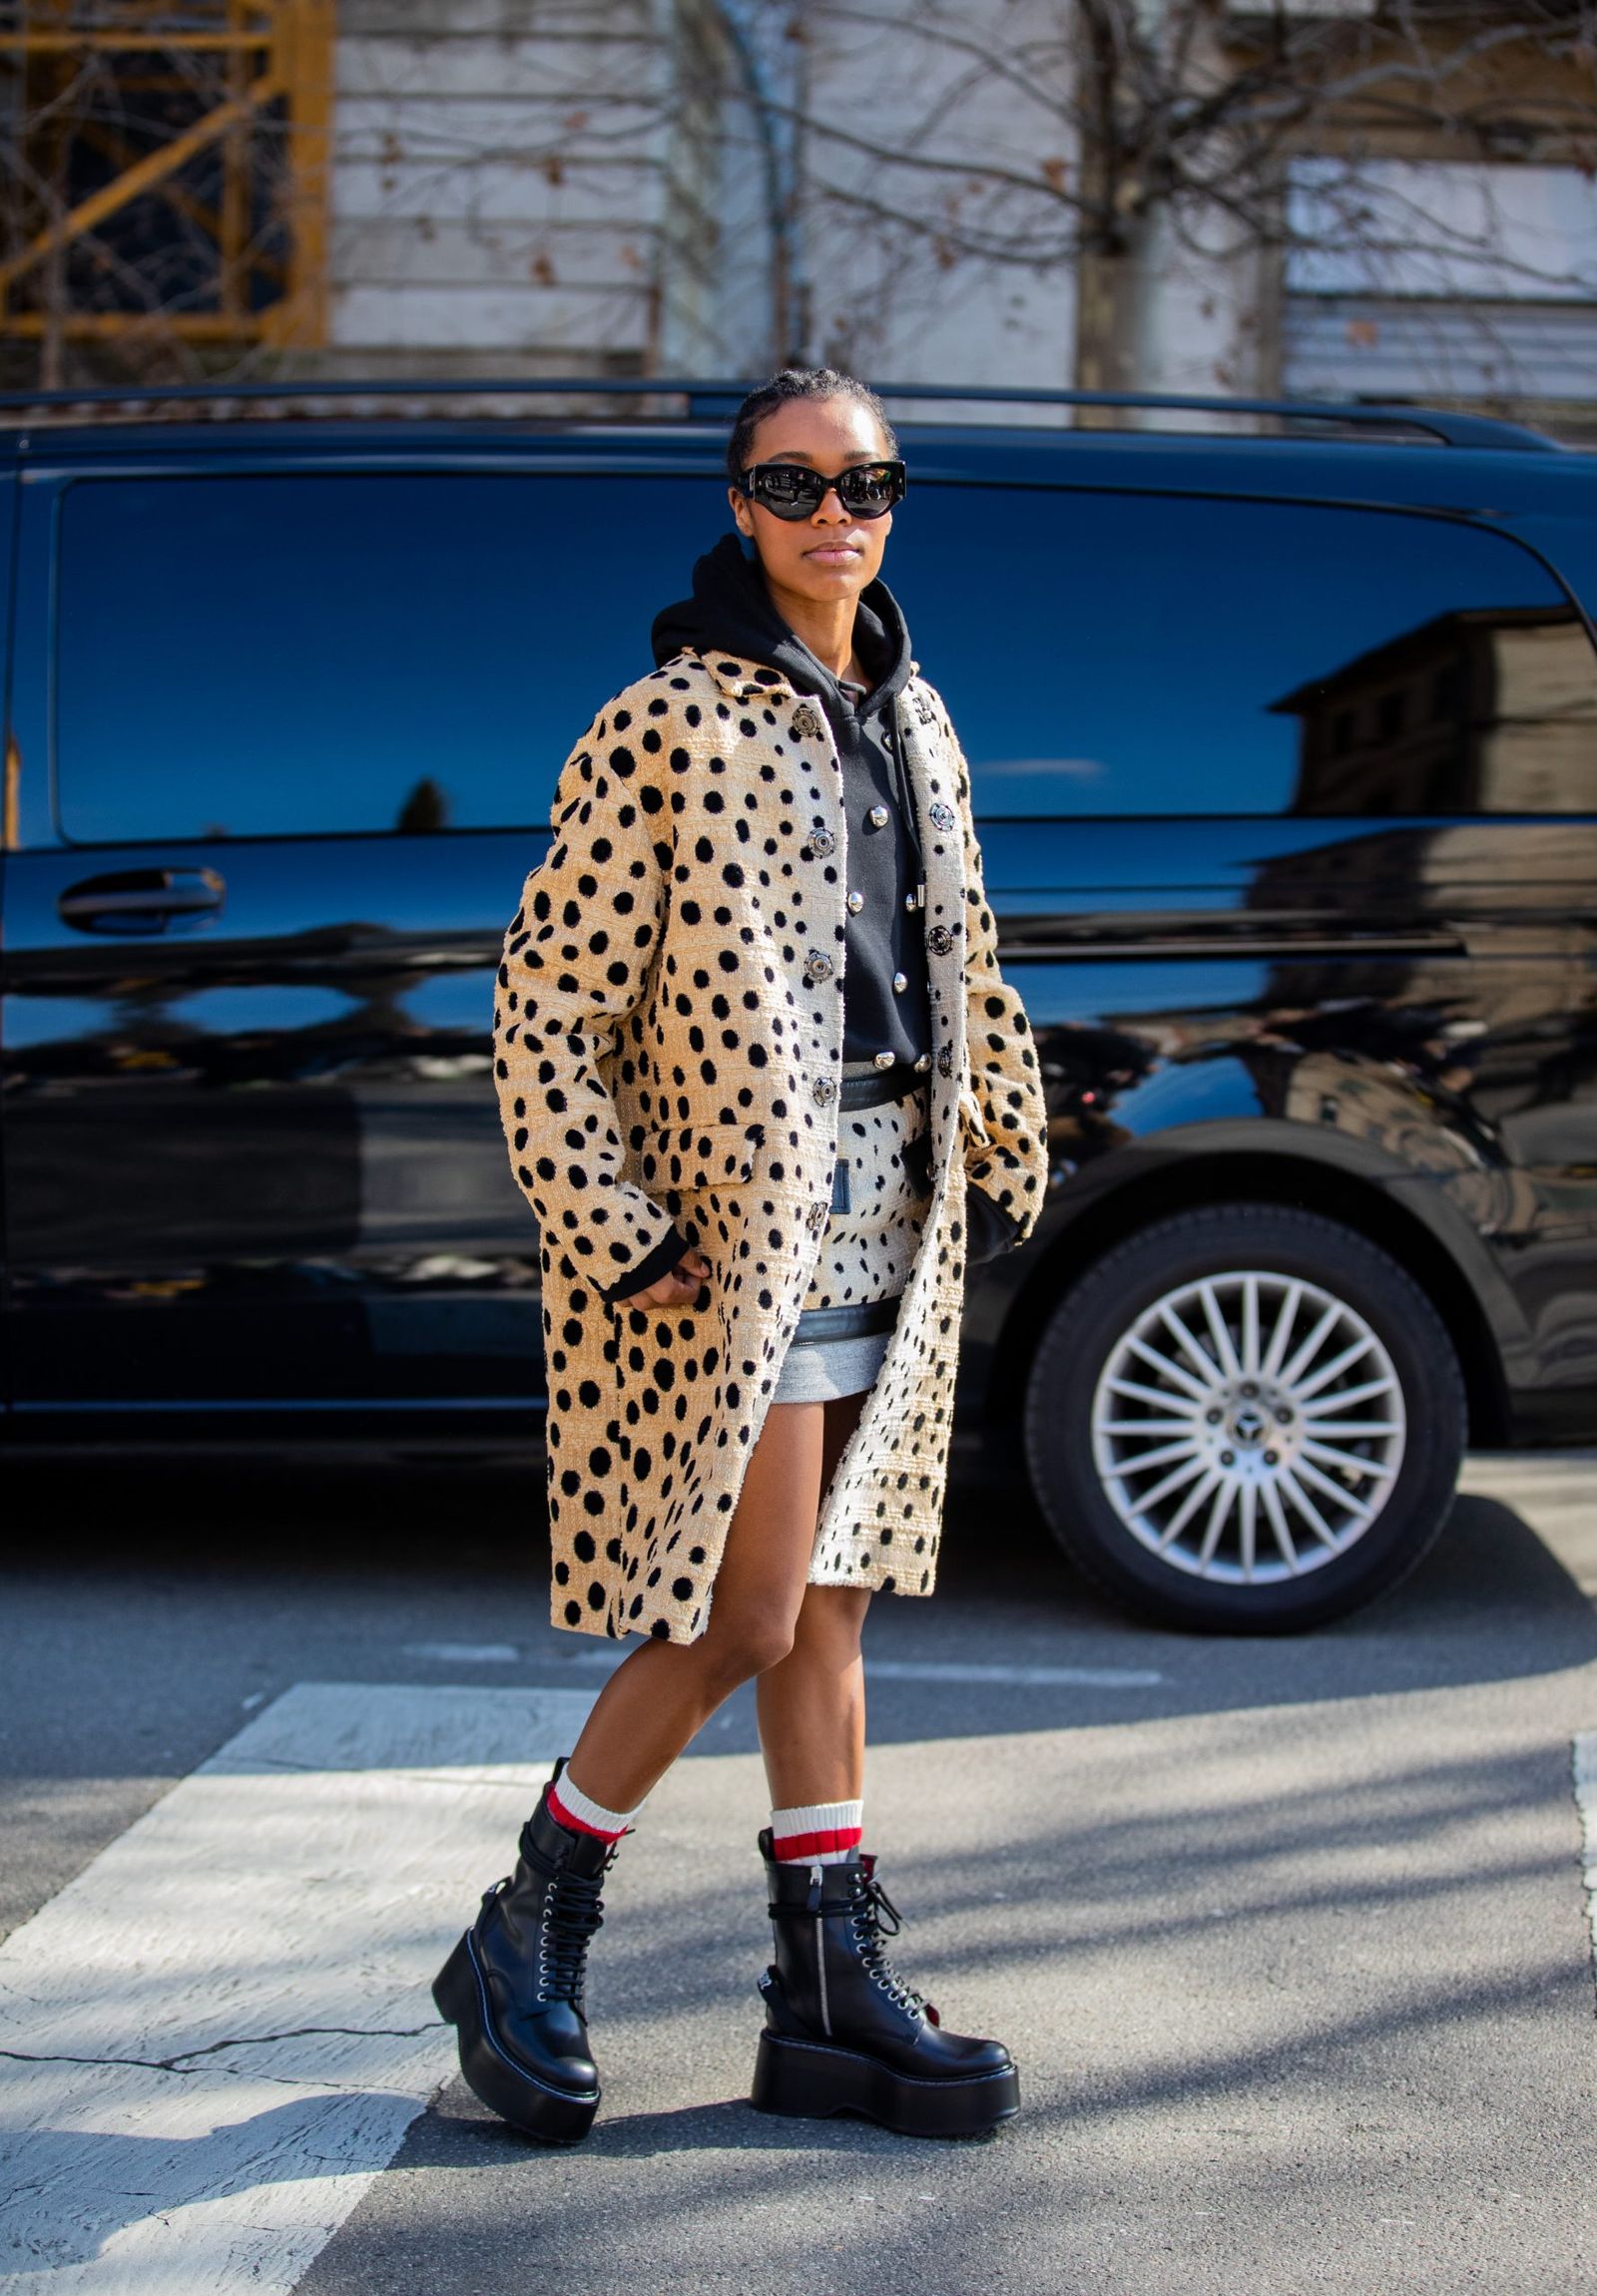 The best street style looks from Milan Fashion Week | Marie Claire UK